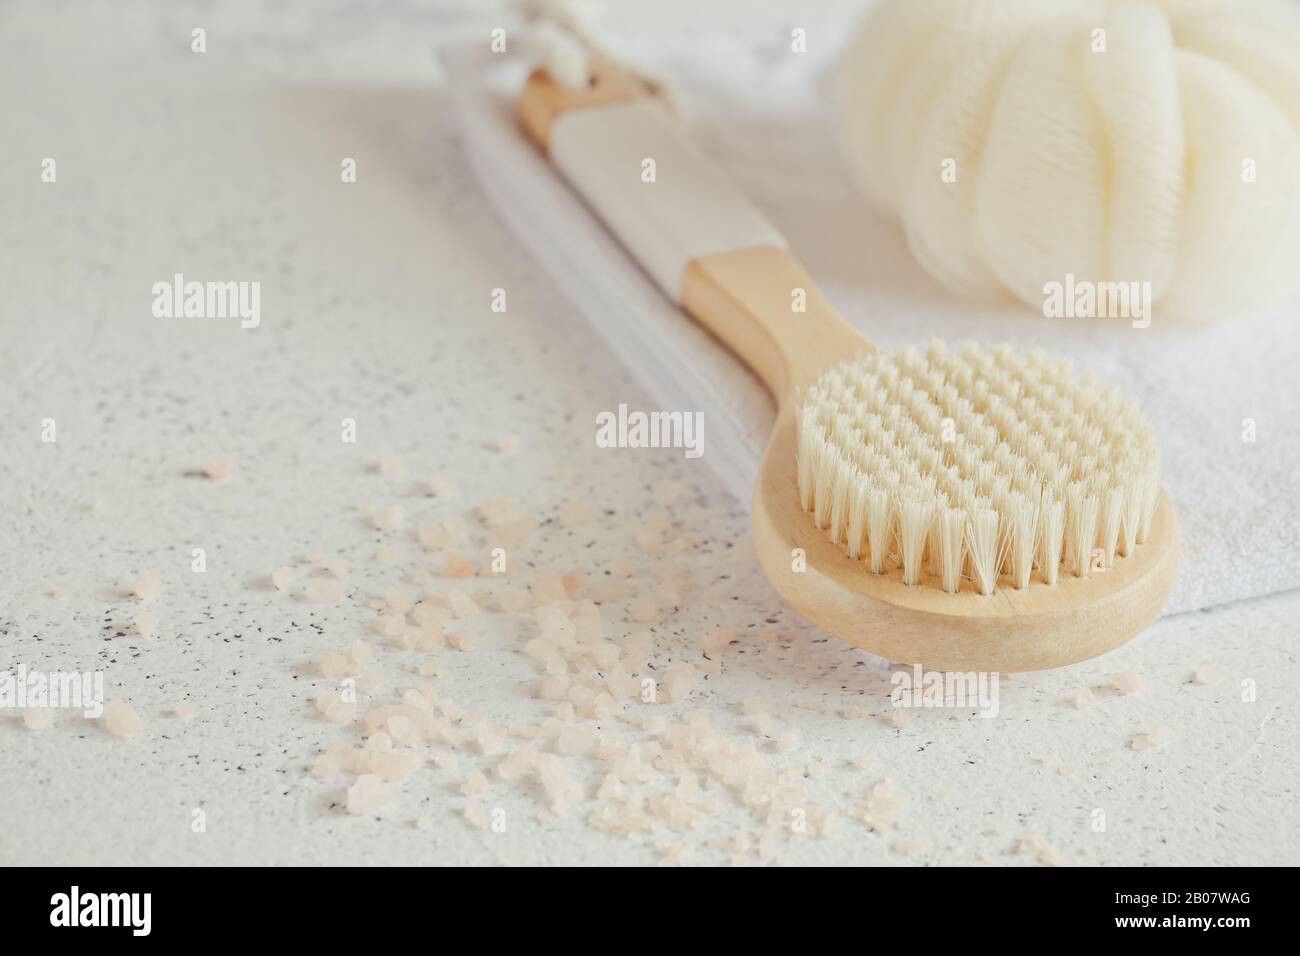 Spa beauty concept. Anti-cellulite massage. Bath Accessories on white stone background, top view, copy space / Stock Photo